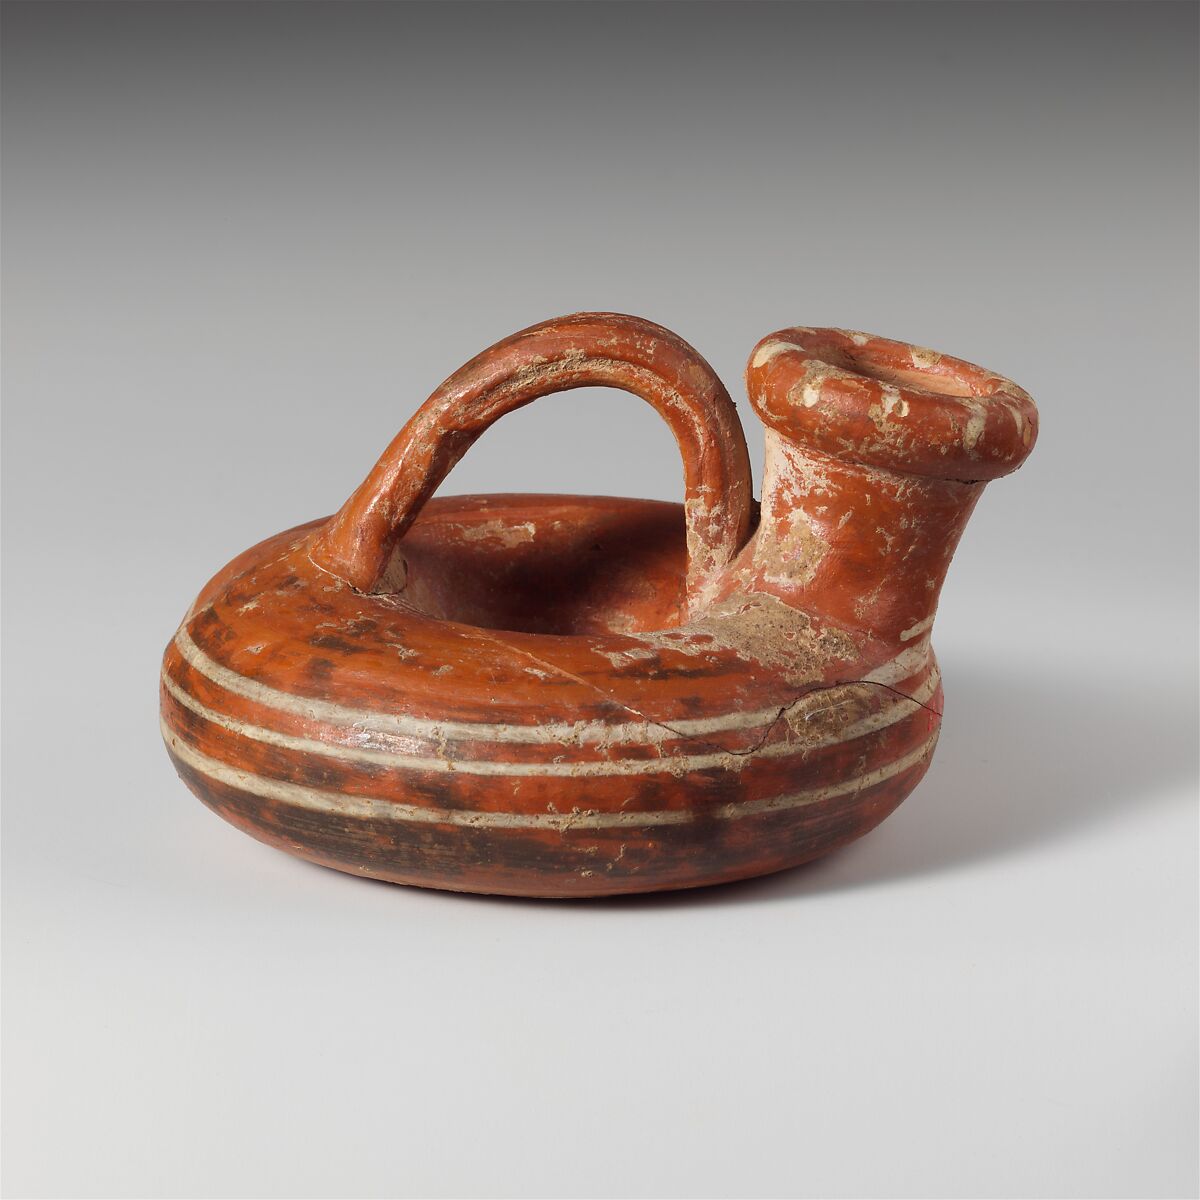 Terracotta ring askos (flask with a spout and handle over the top), Terracotta, Lydian 